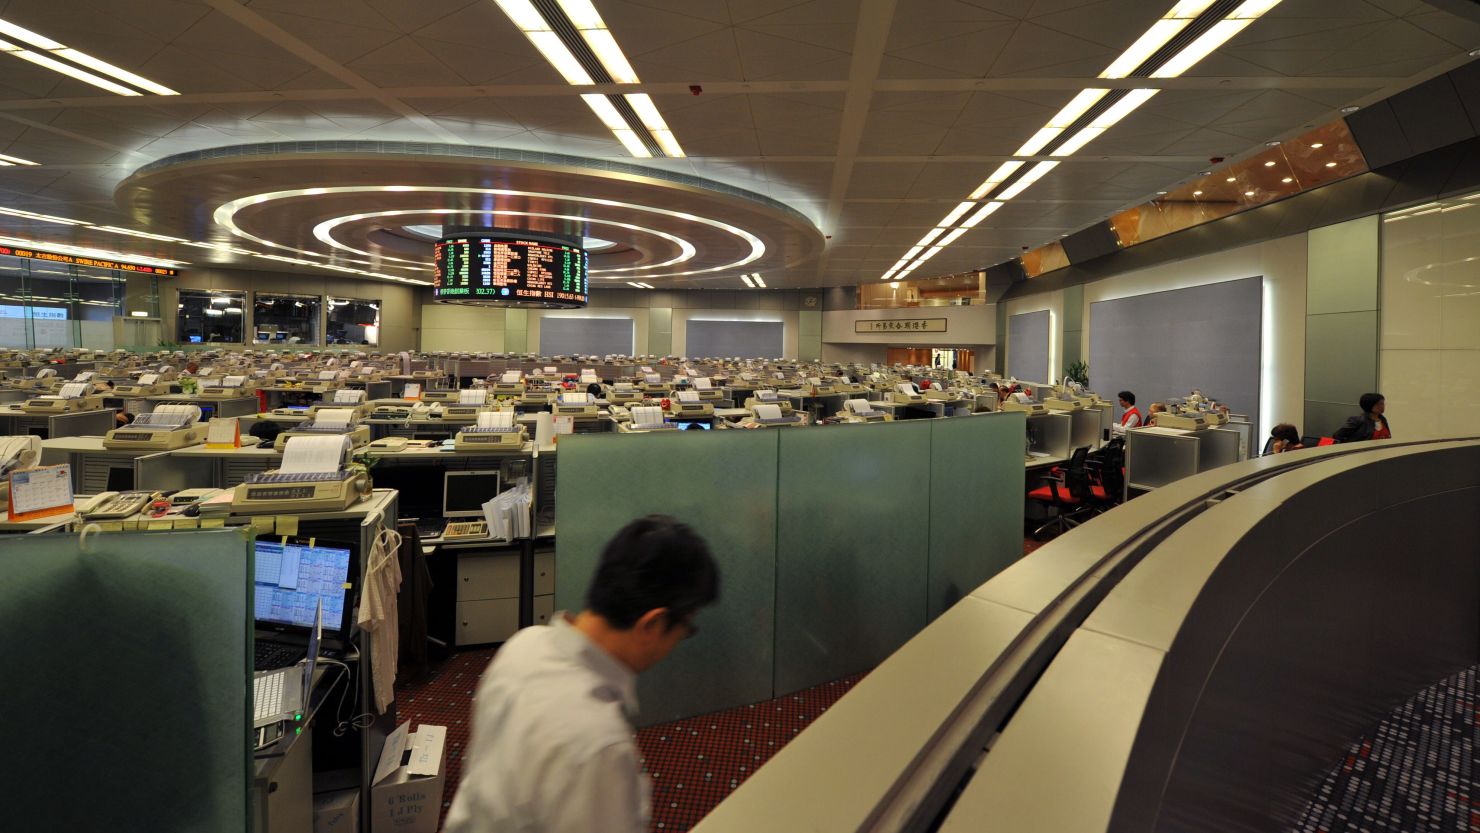 Asian markets have eased after an agency downgraded the credit ratings of nine eurozone countries.